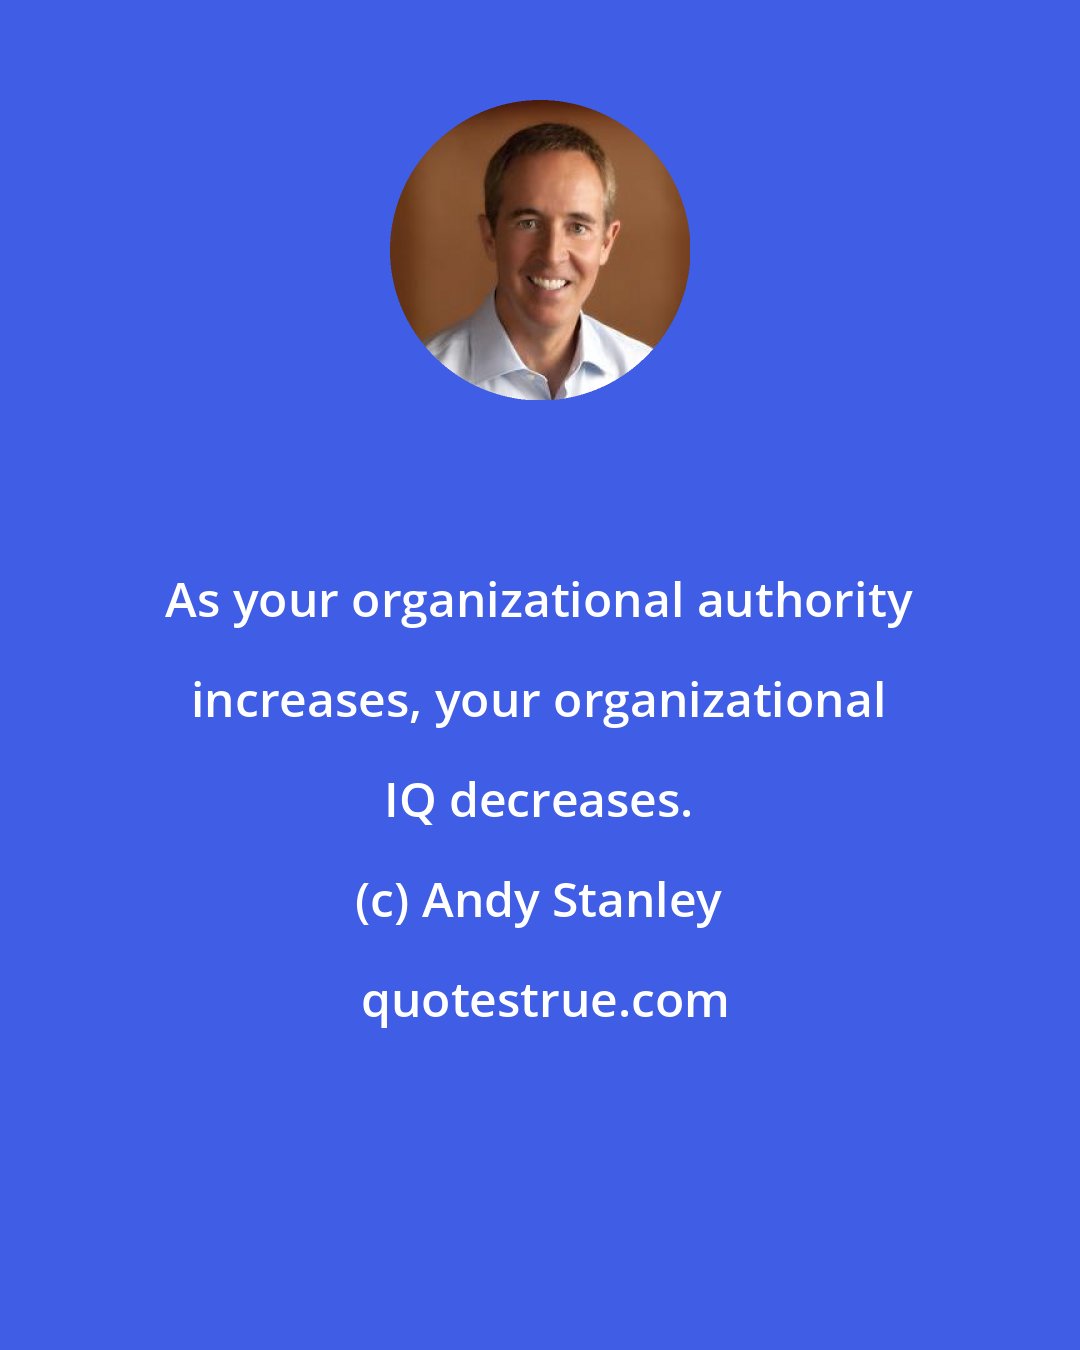 Andy Stanley: As your organizational authority increases, your organizational IQ decreases.